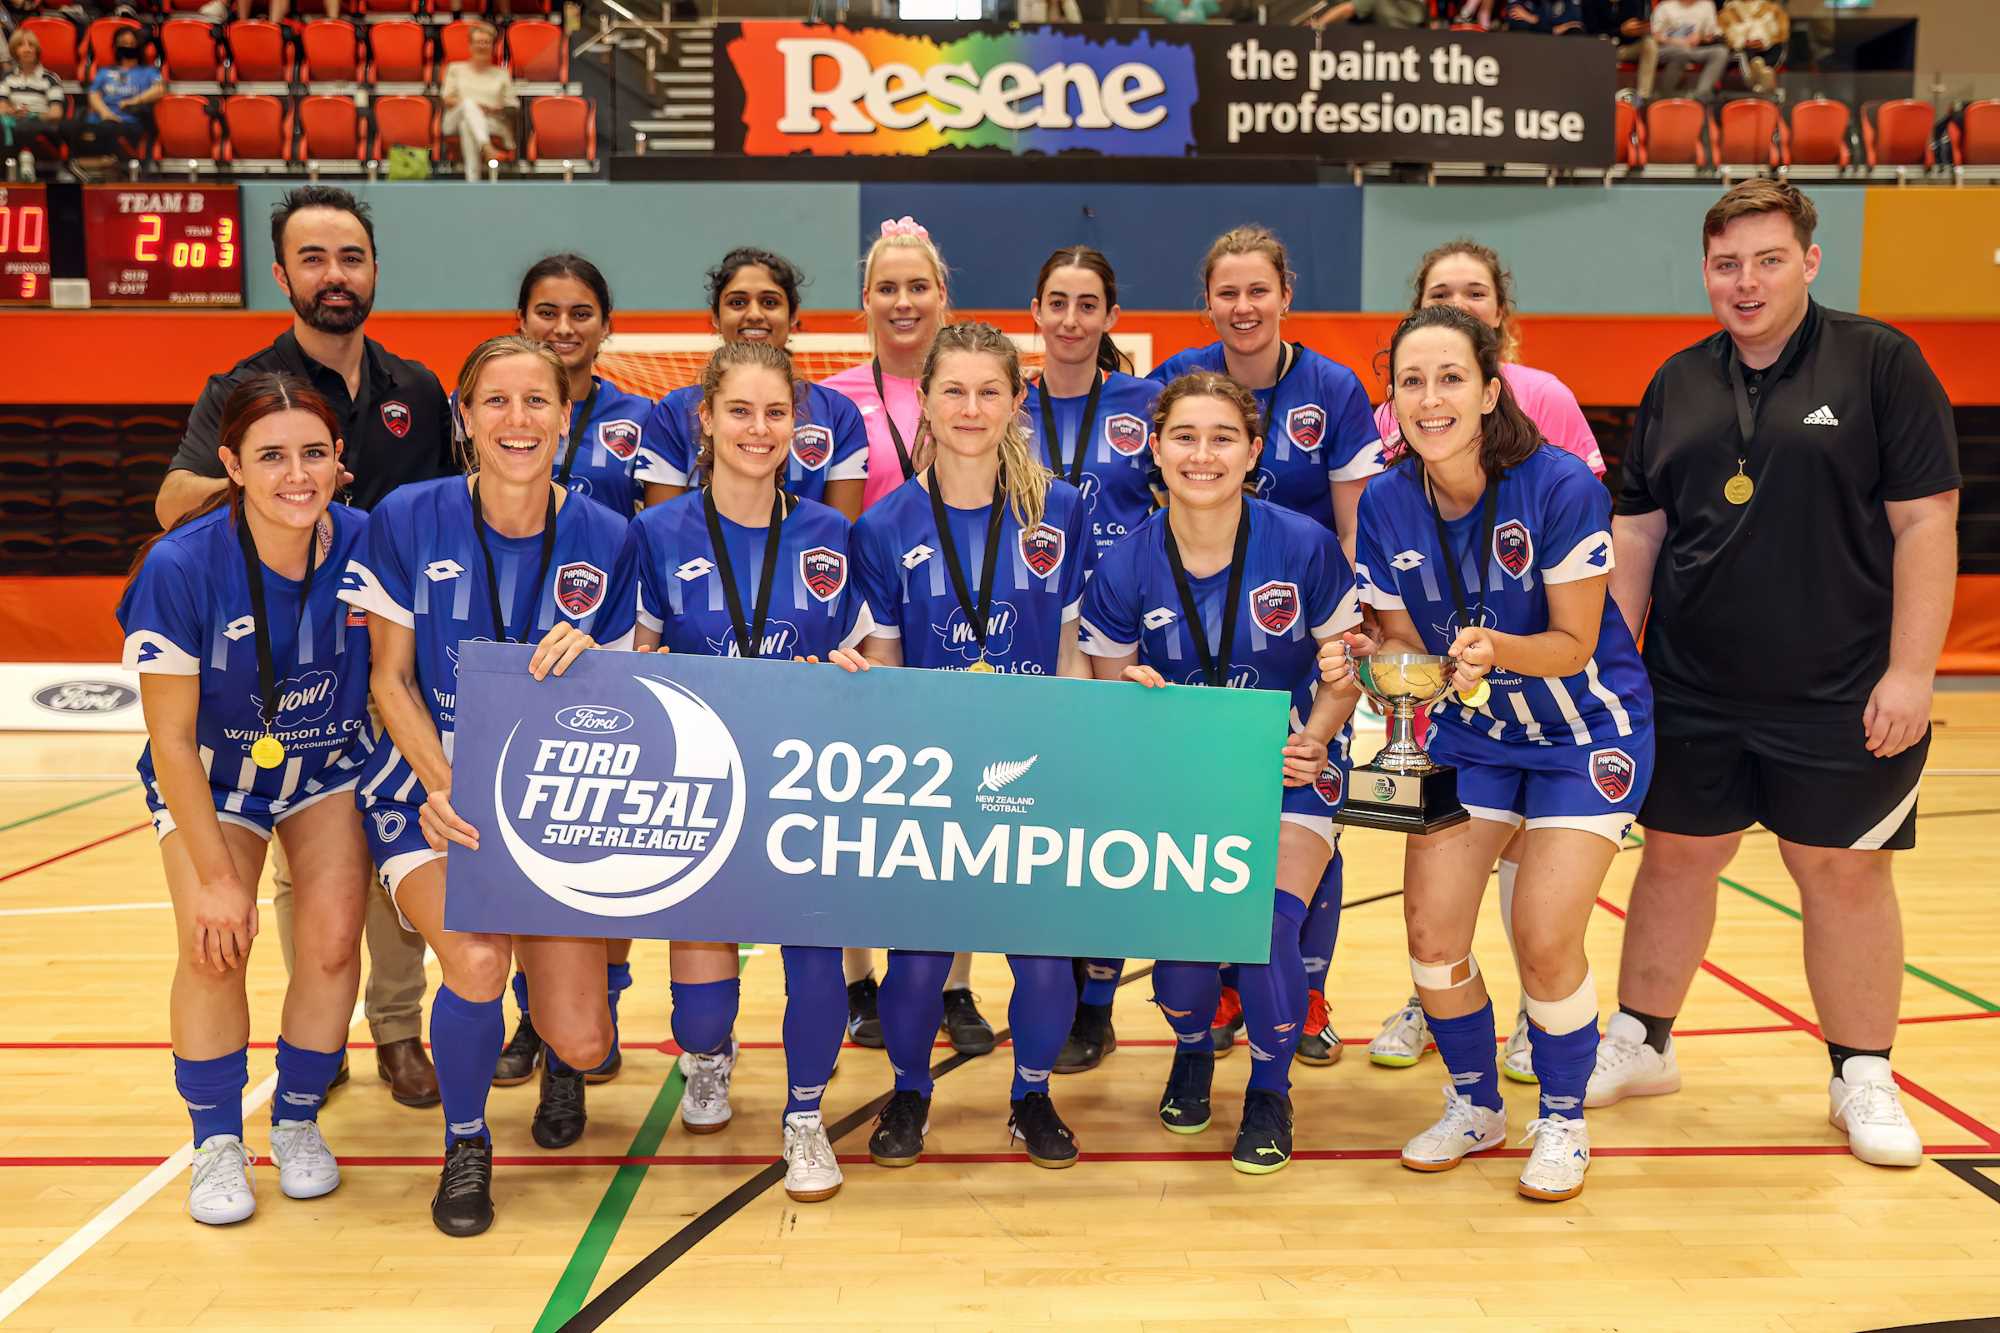 An insight into the landscape of the Women’s Futsal Industry